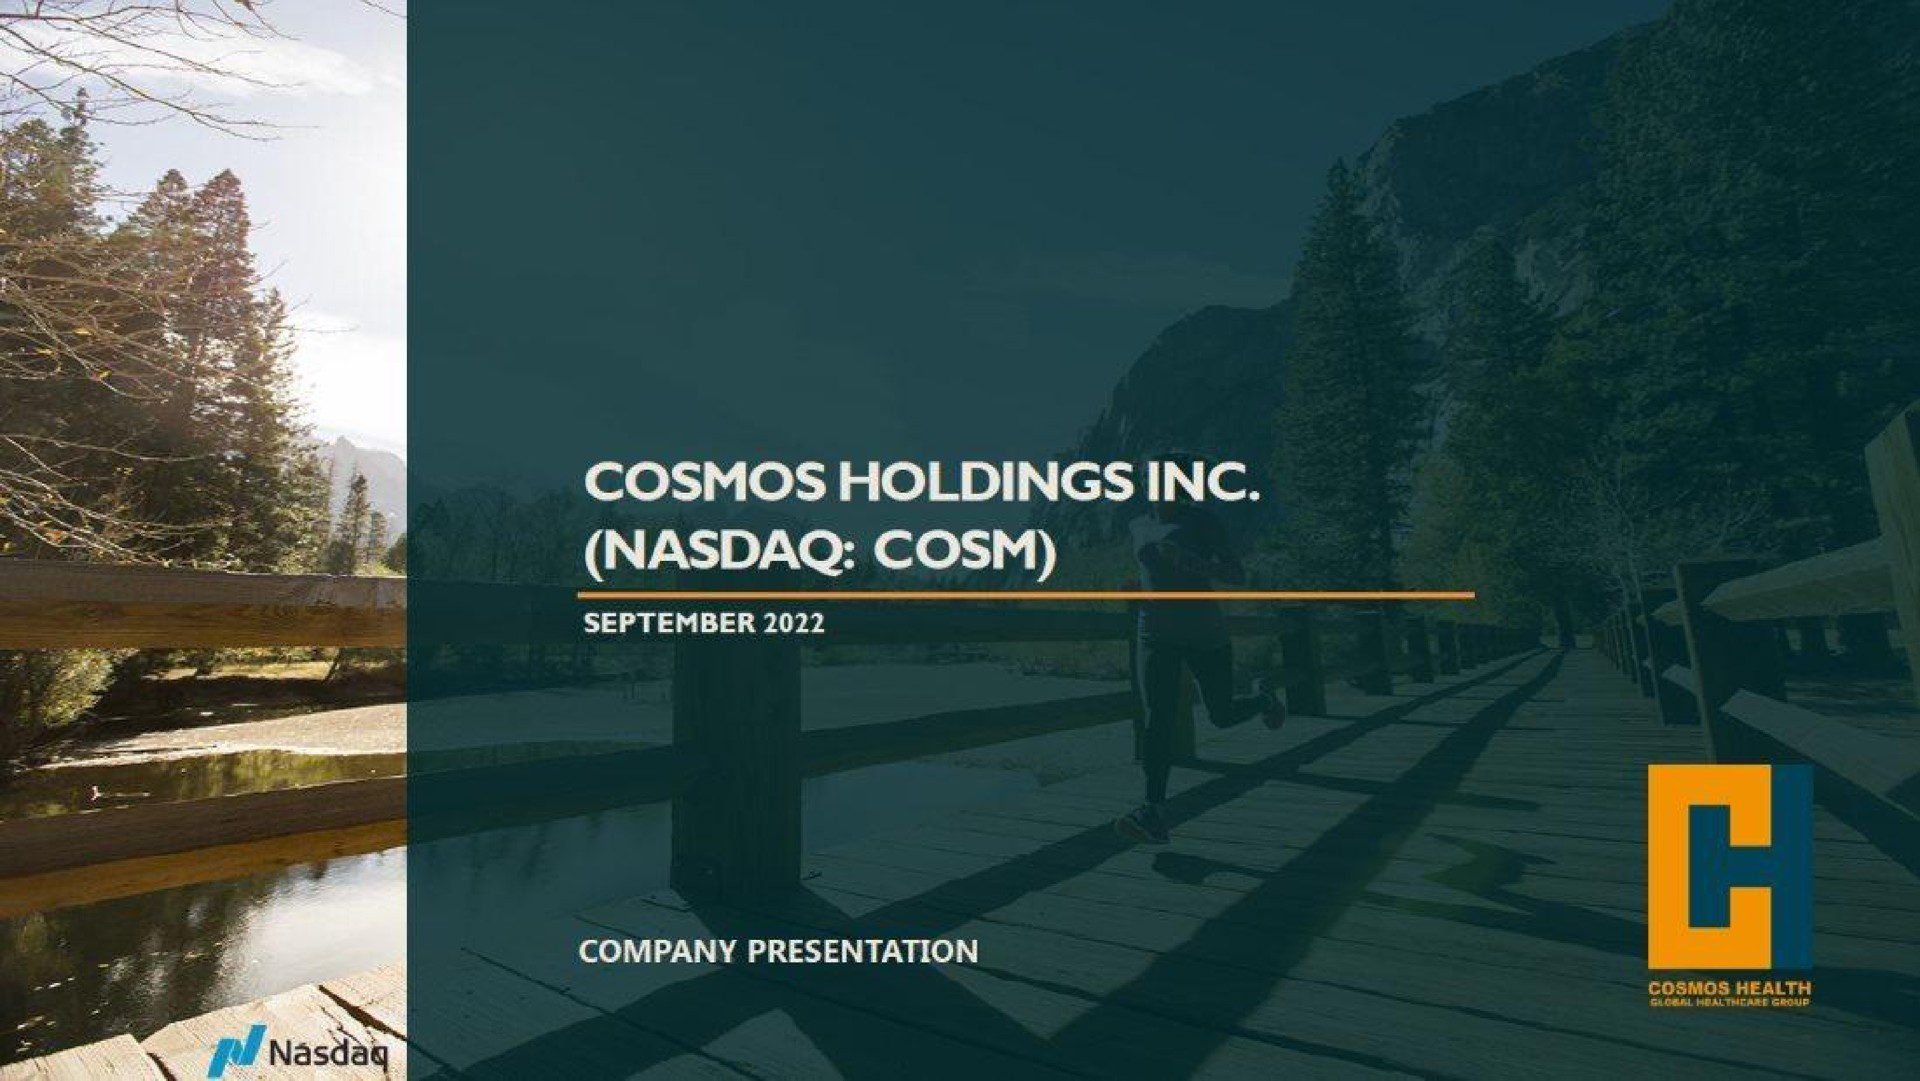 cosmos holdings aids | Cosmos Holdings